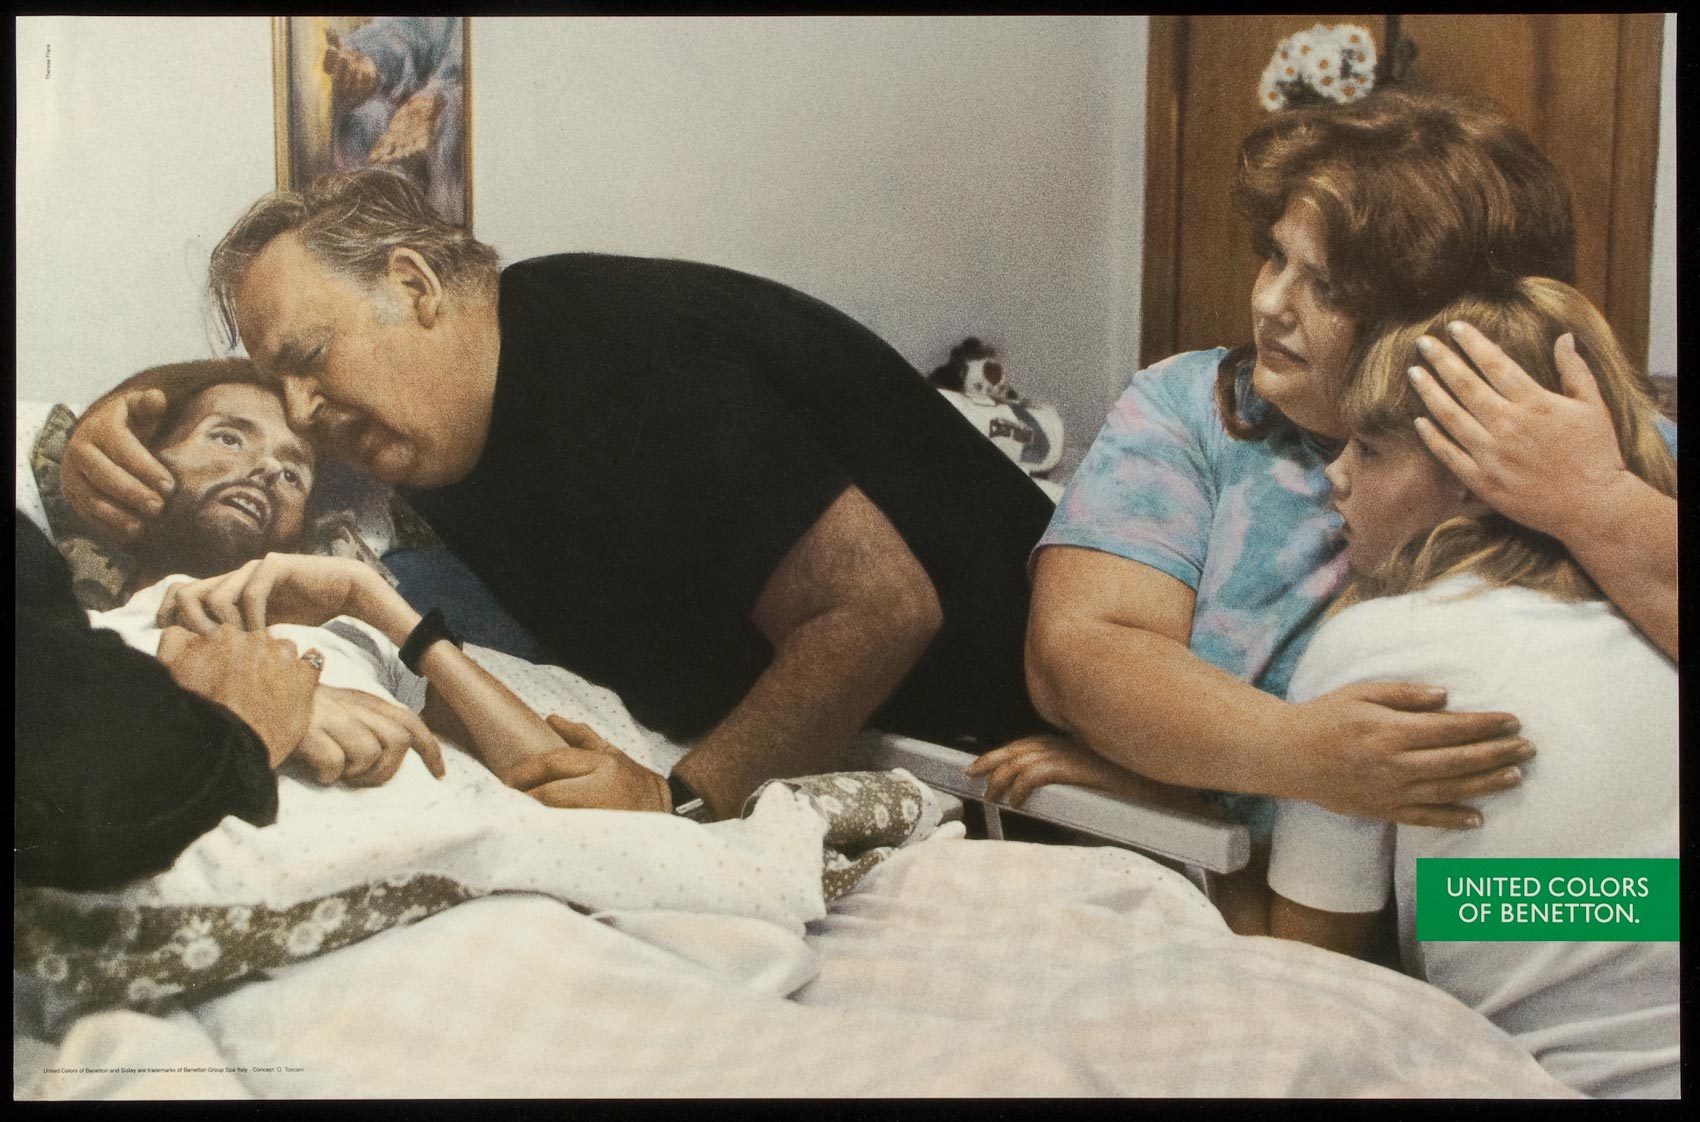 A frail emaciated young man is cradled by his crying father has his mother and sister look on distraught. From out of frame another hand emerges to hold the young man's hand.